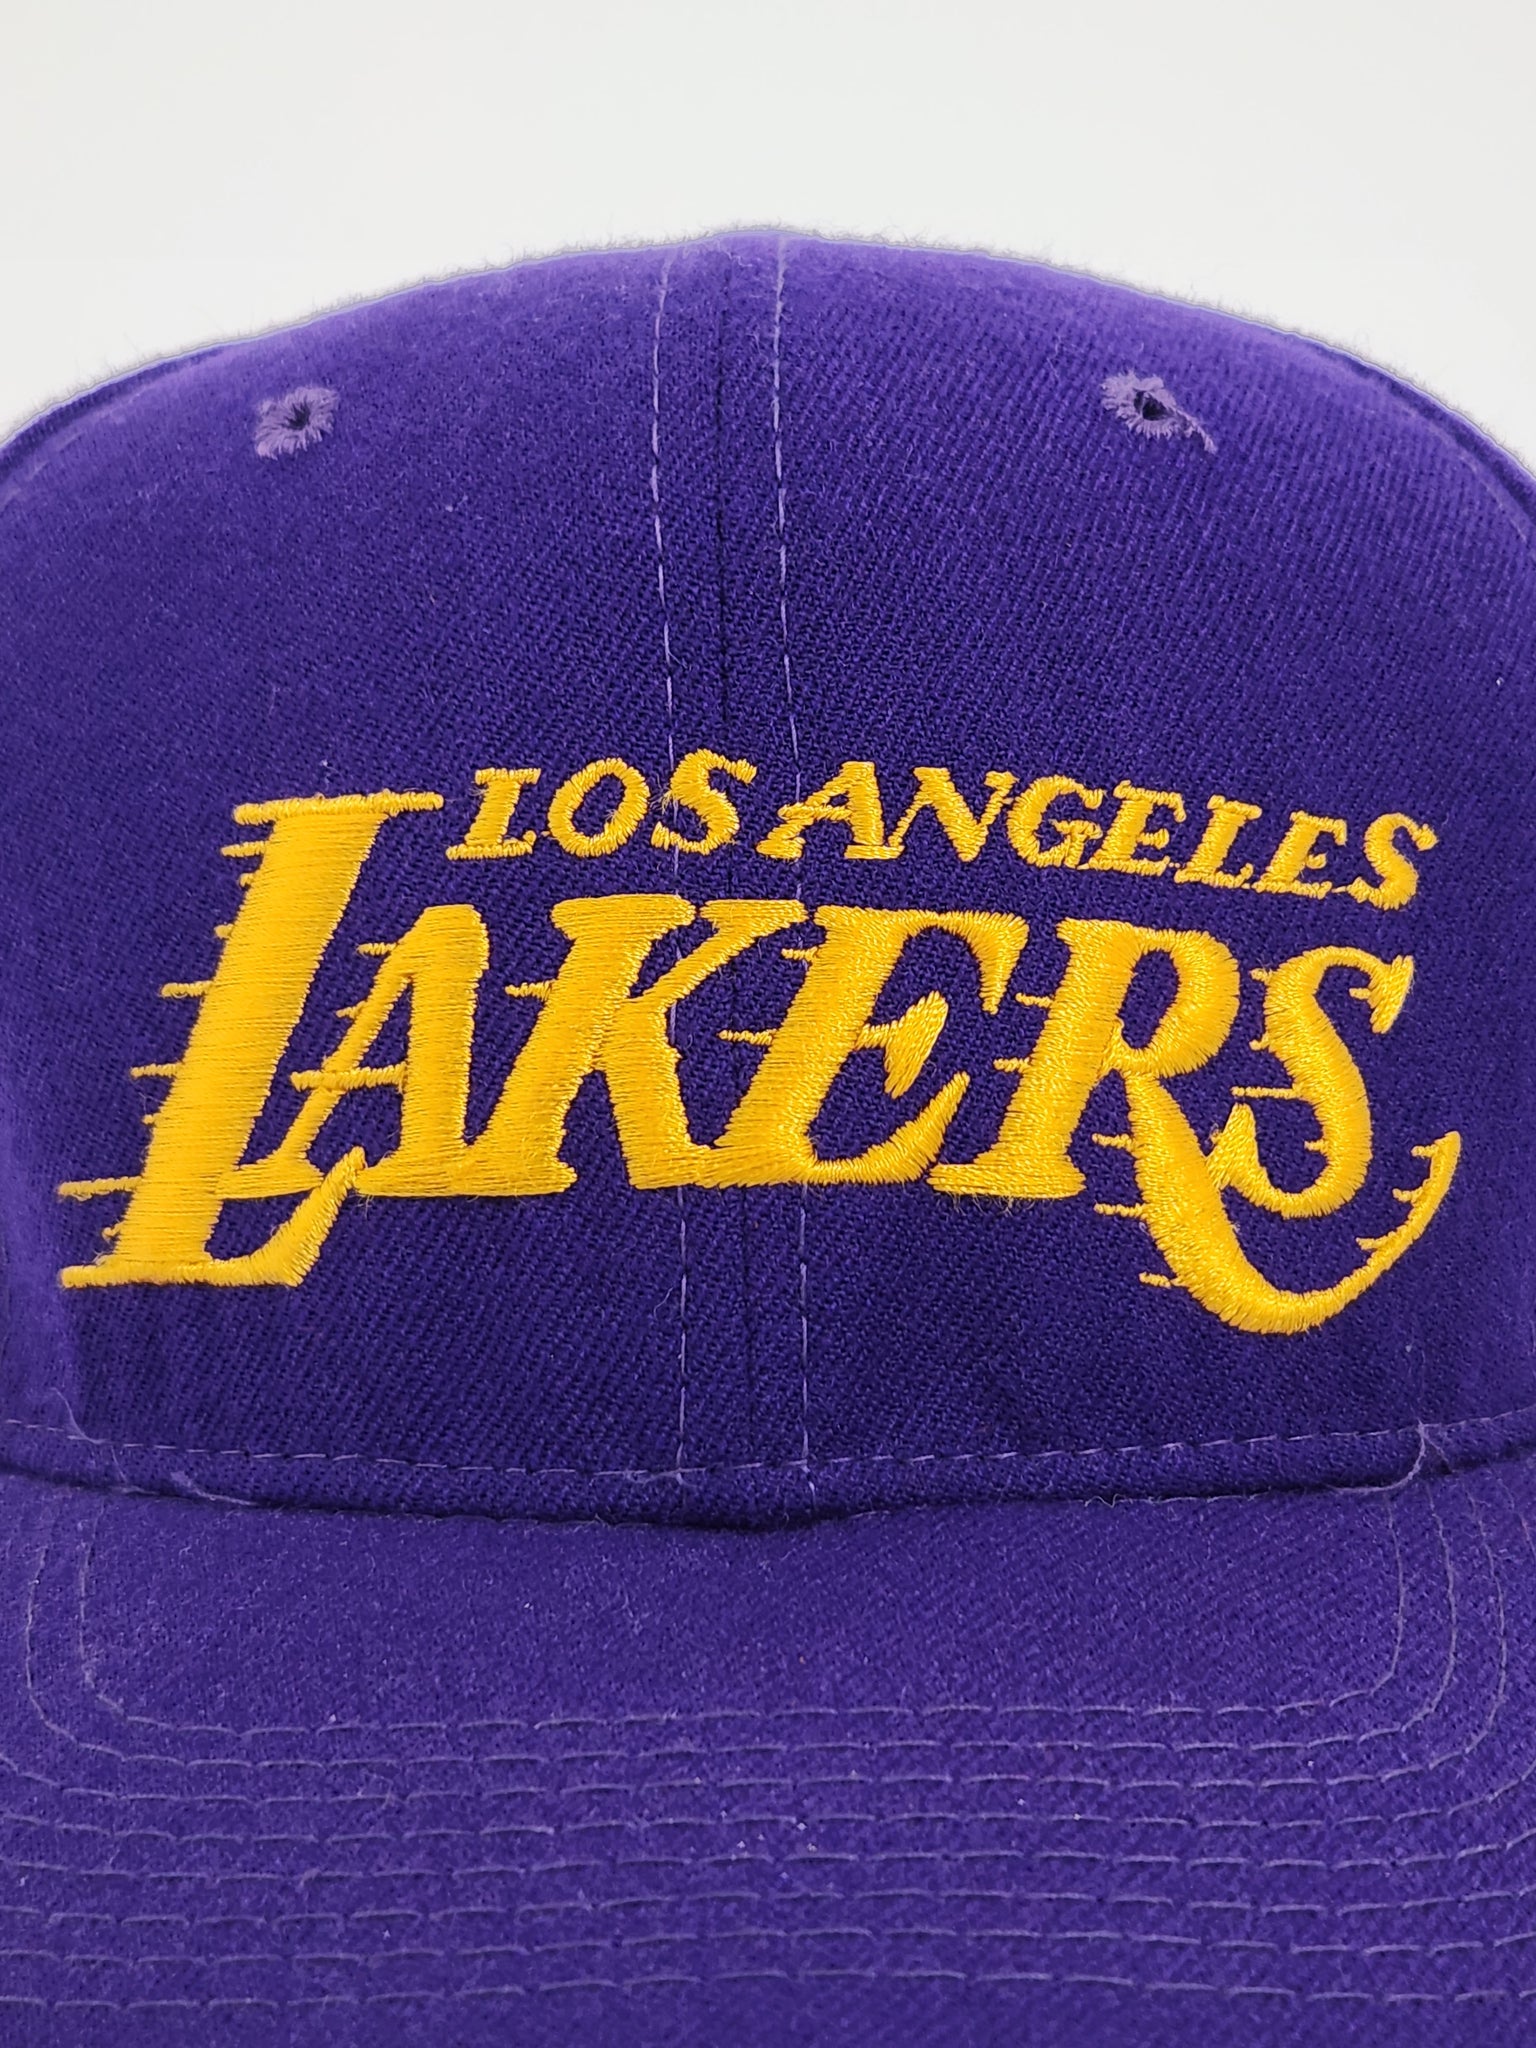 LA Lakers Hat (VTG) - Wool Script by Starter and 50 similar items